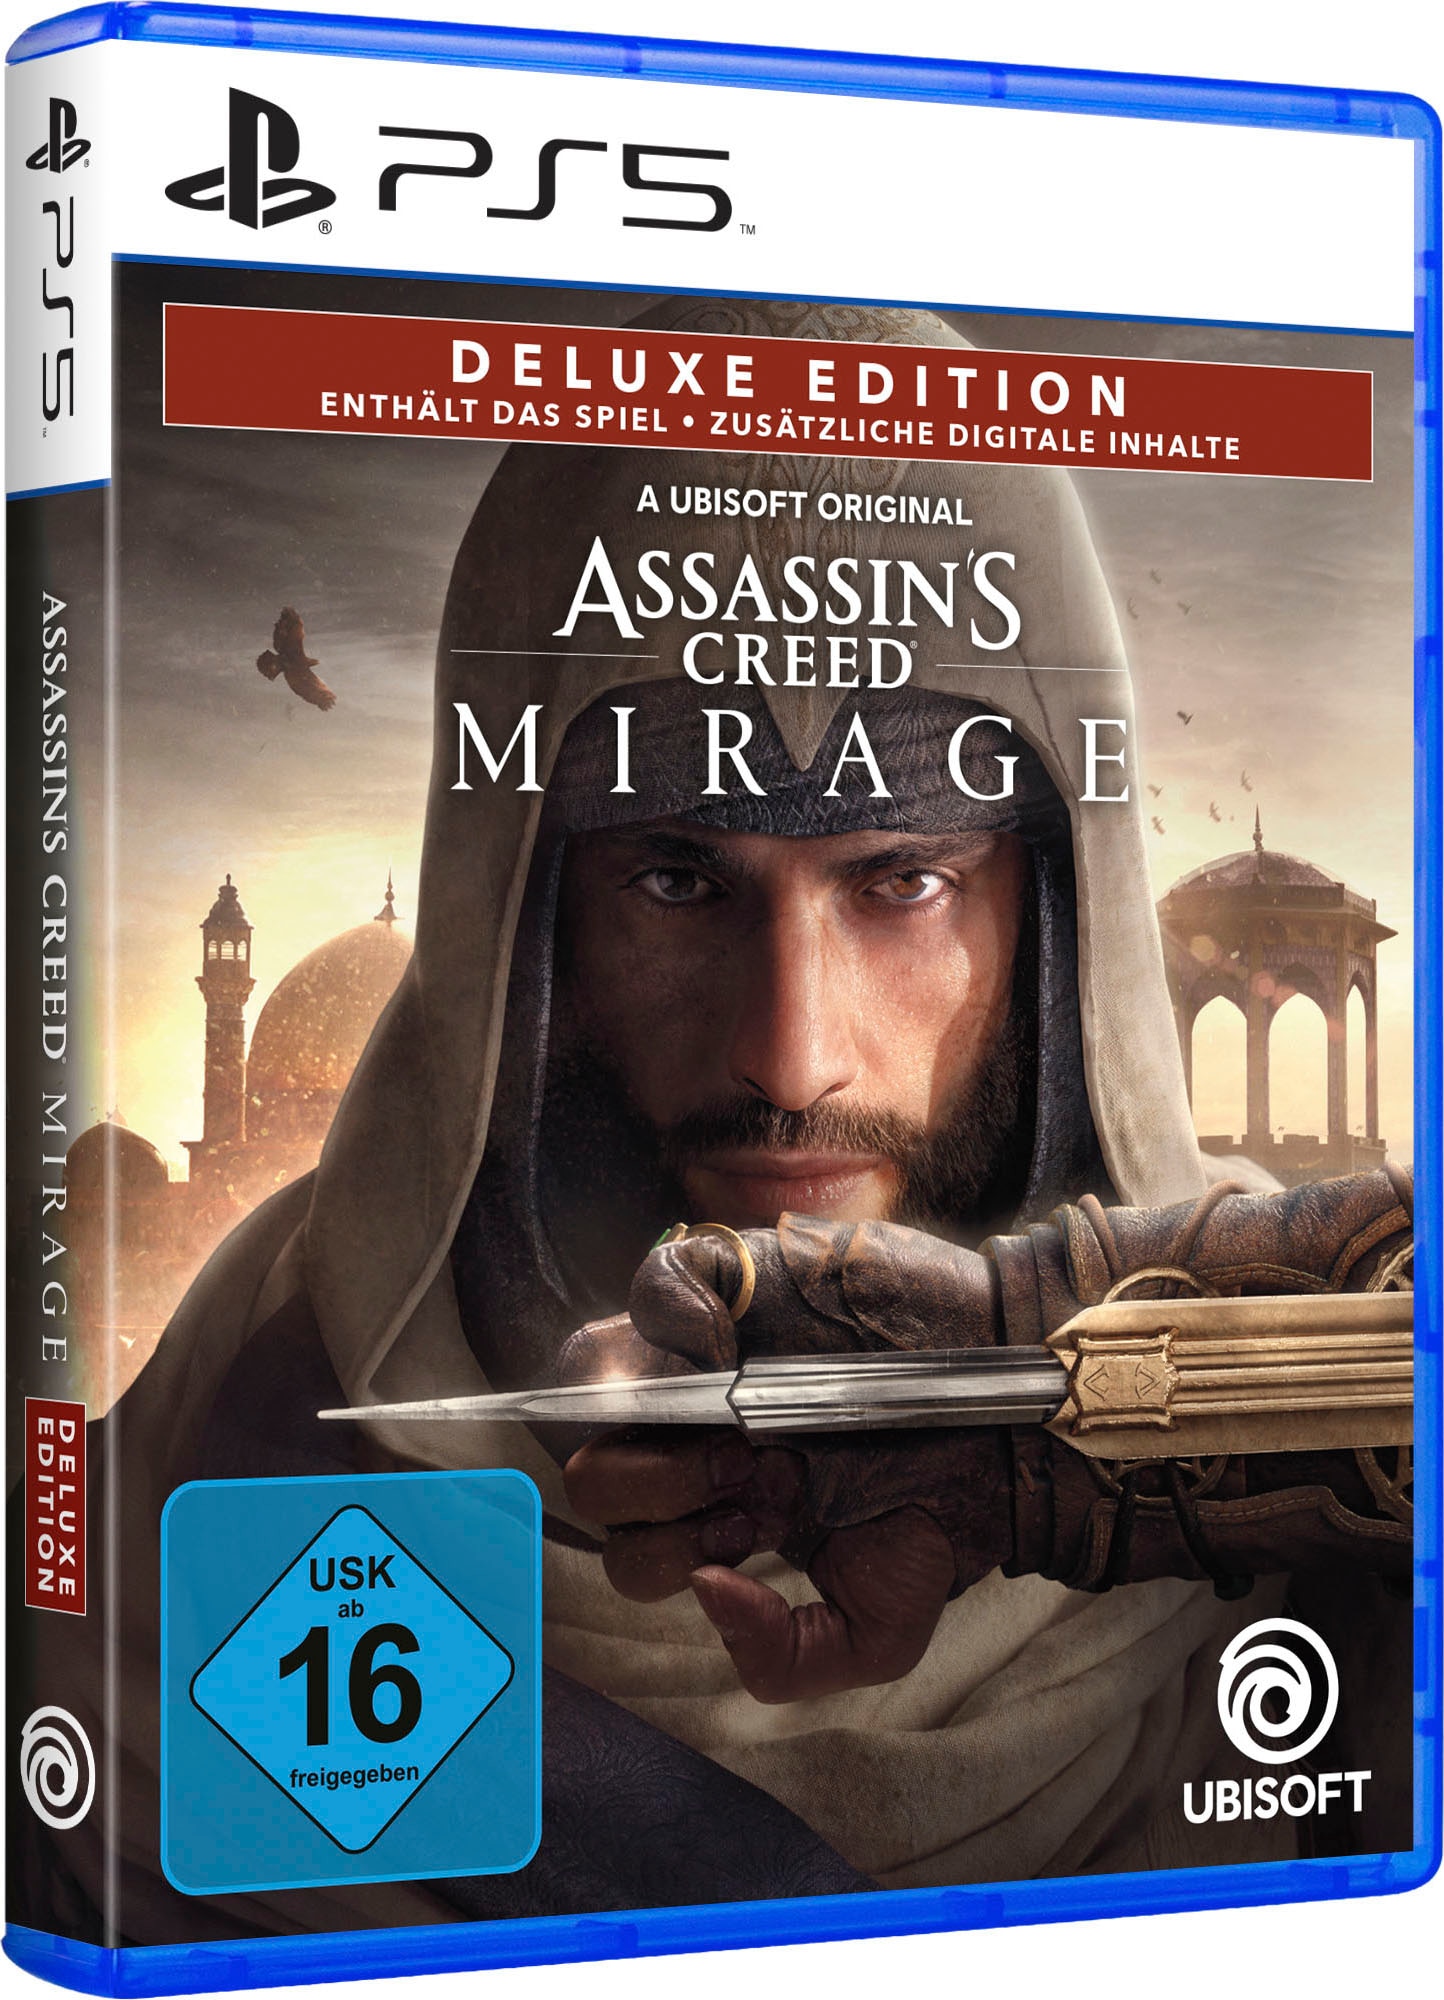 UBISOFT Spielesoftware »Assassin's Creed Mirage Deluxe Edition -«, PlayStation 5